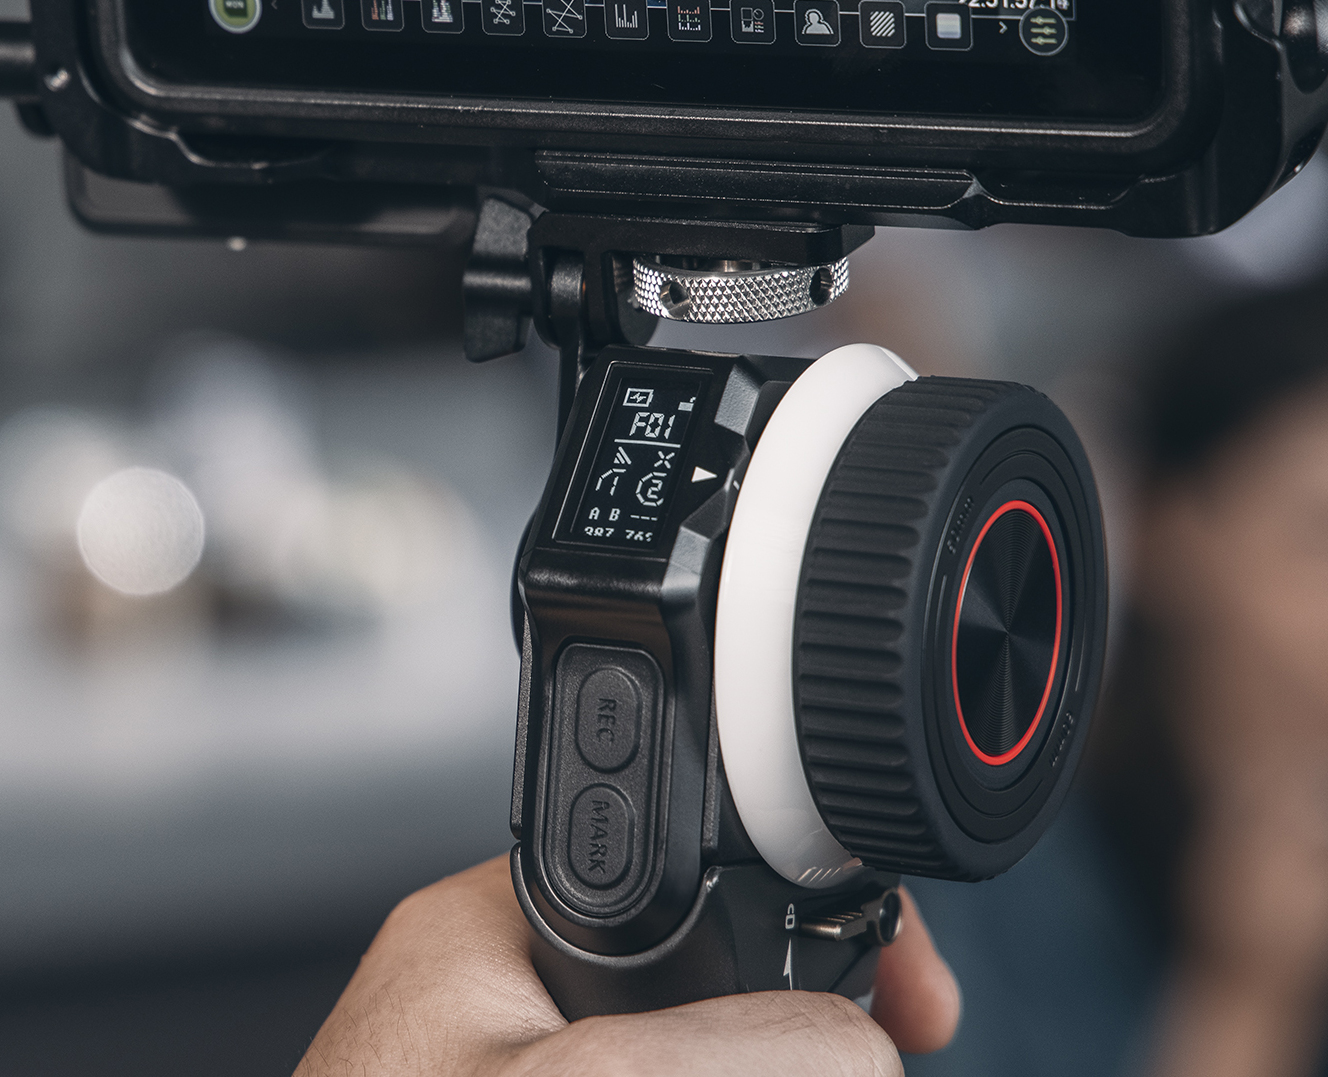 SmallRig introduces MagicFIZ Wireless Follow Focus System starting at  - competition for Tilta N